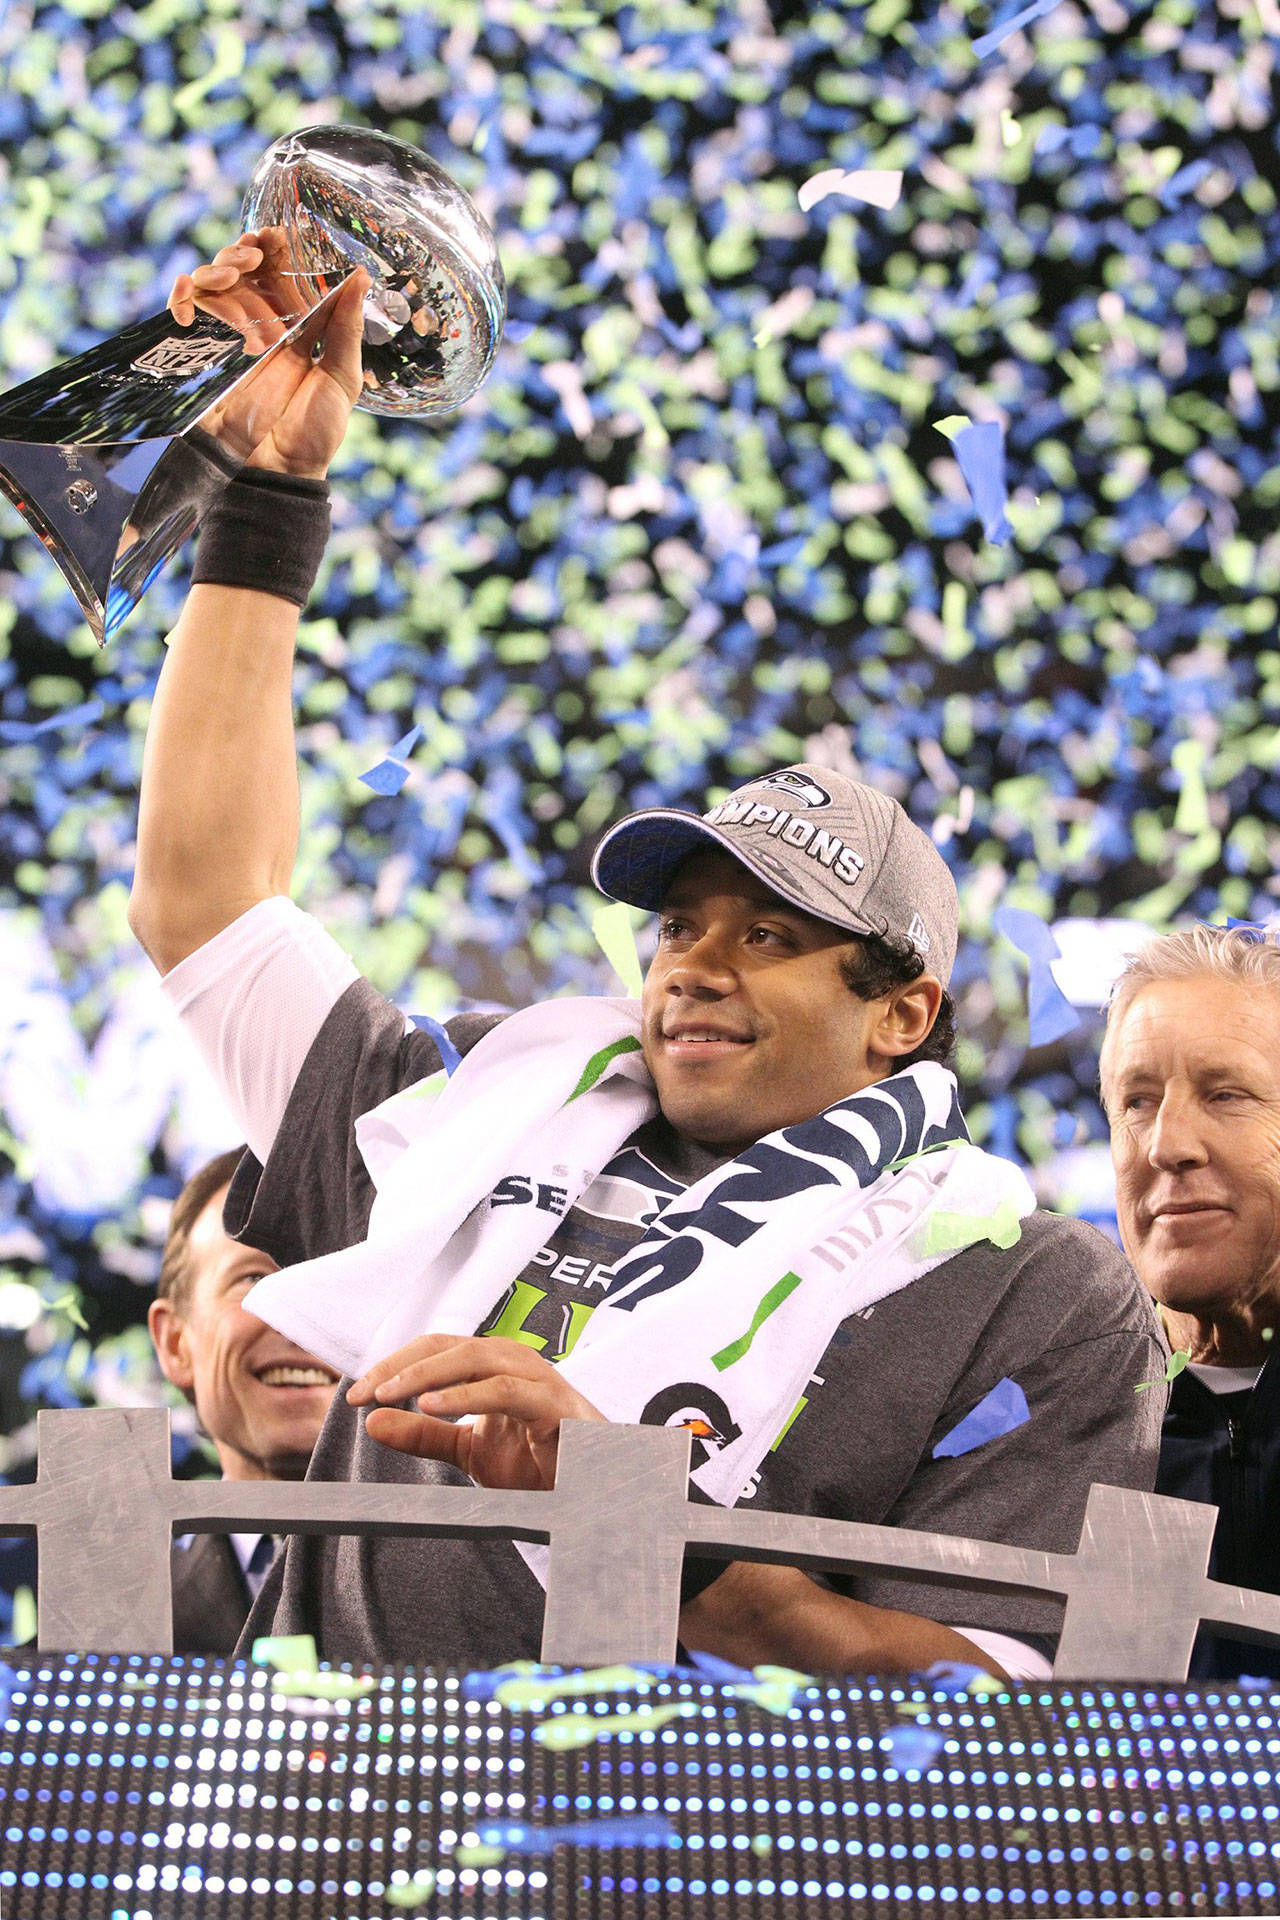 Seattle Seahawks quarterback Russell Wilson raises the Lombardi trophy after a 43-8 victory against the Denver Broncos in Super Bowl XLVIII at MetLife Stadium in East Rutherford, N.J., on Sunday, Feb. 2, 2014. (Tony Overman/The Olympian/MCT)